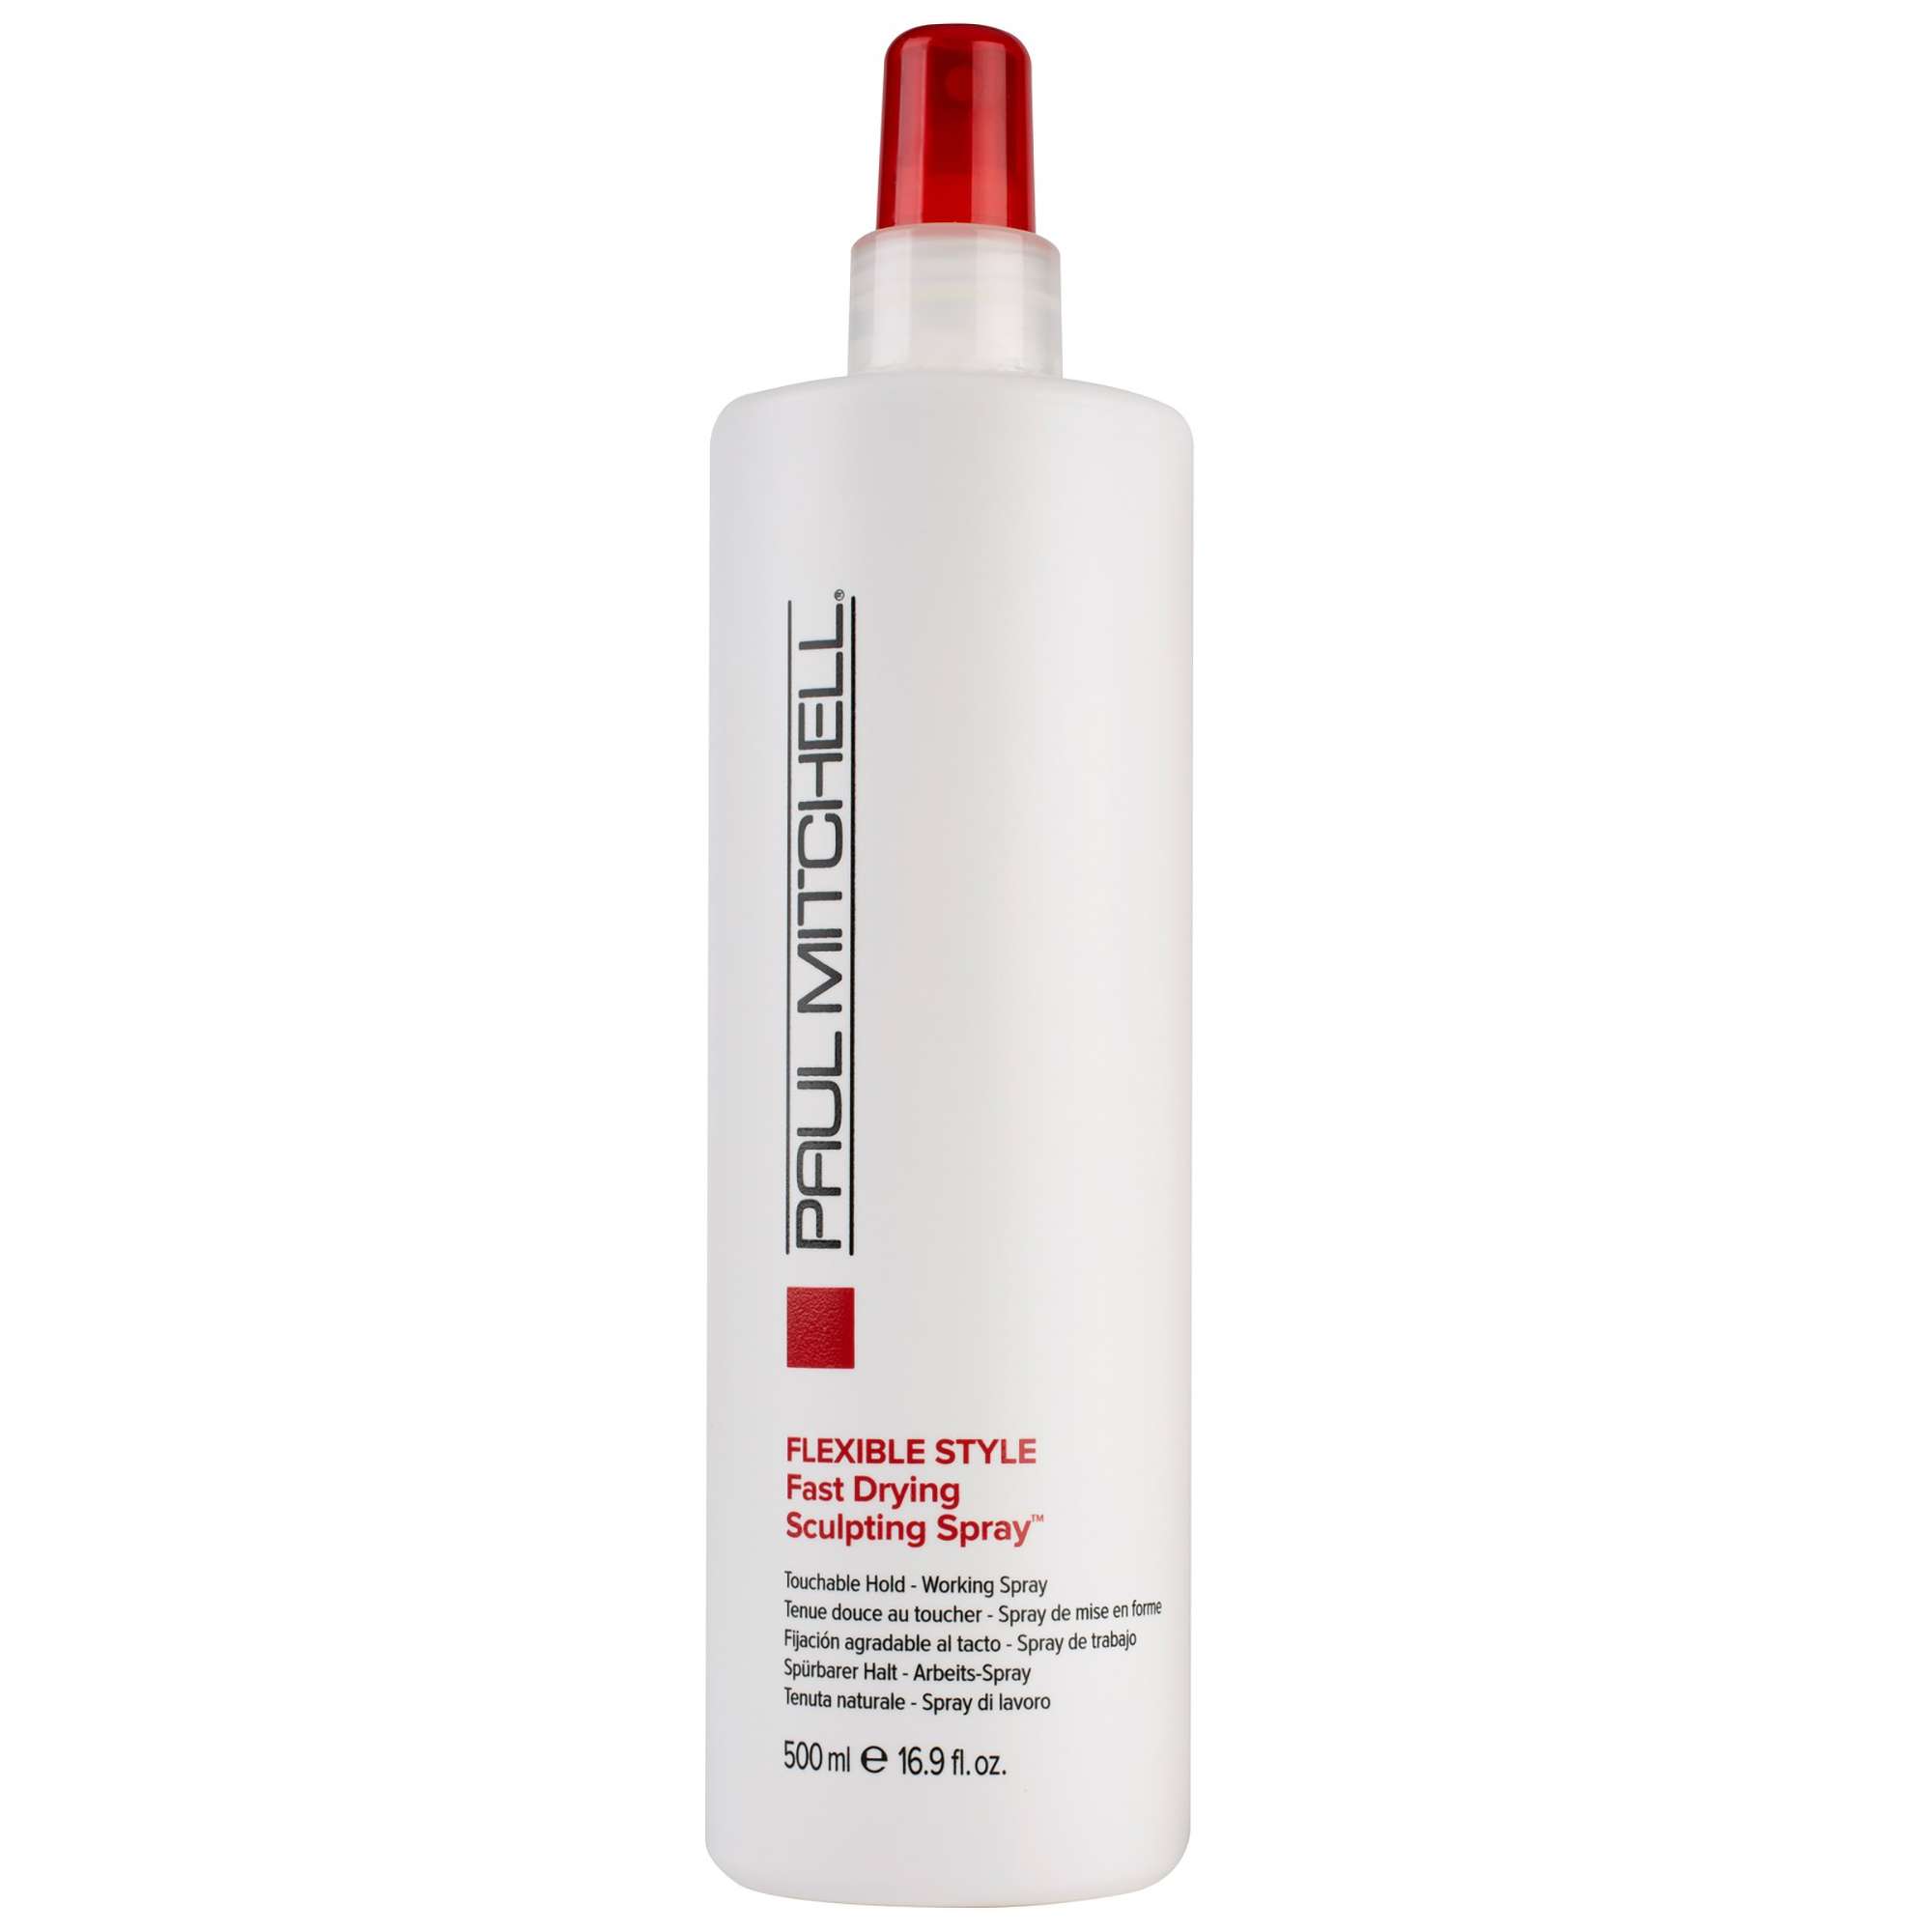 Image of Paul Mitchell Flexible Style Fast Drying Sculpting Spray 500ml